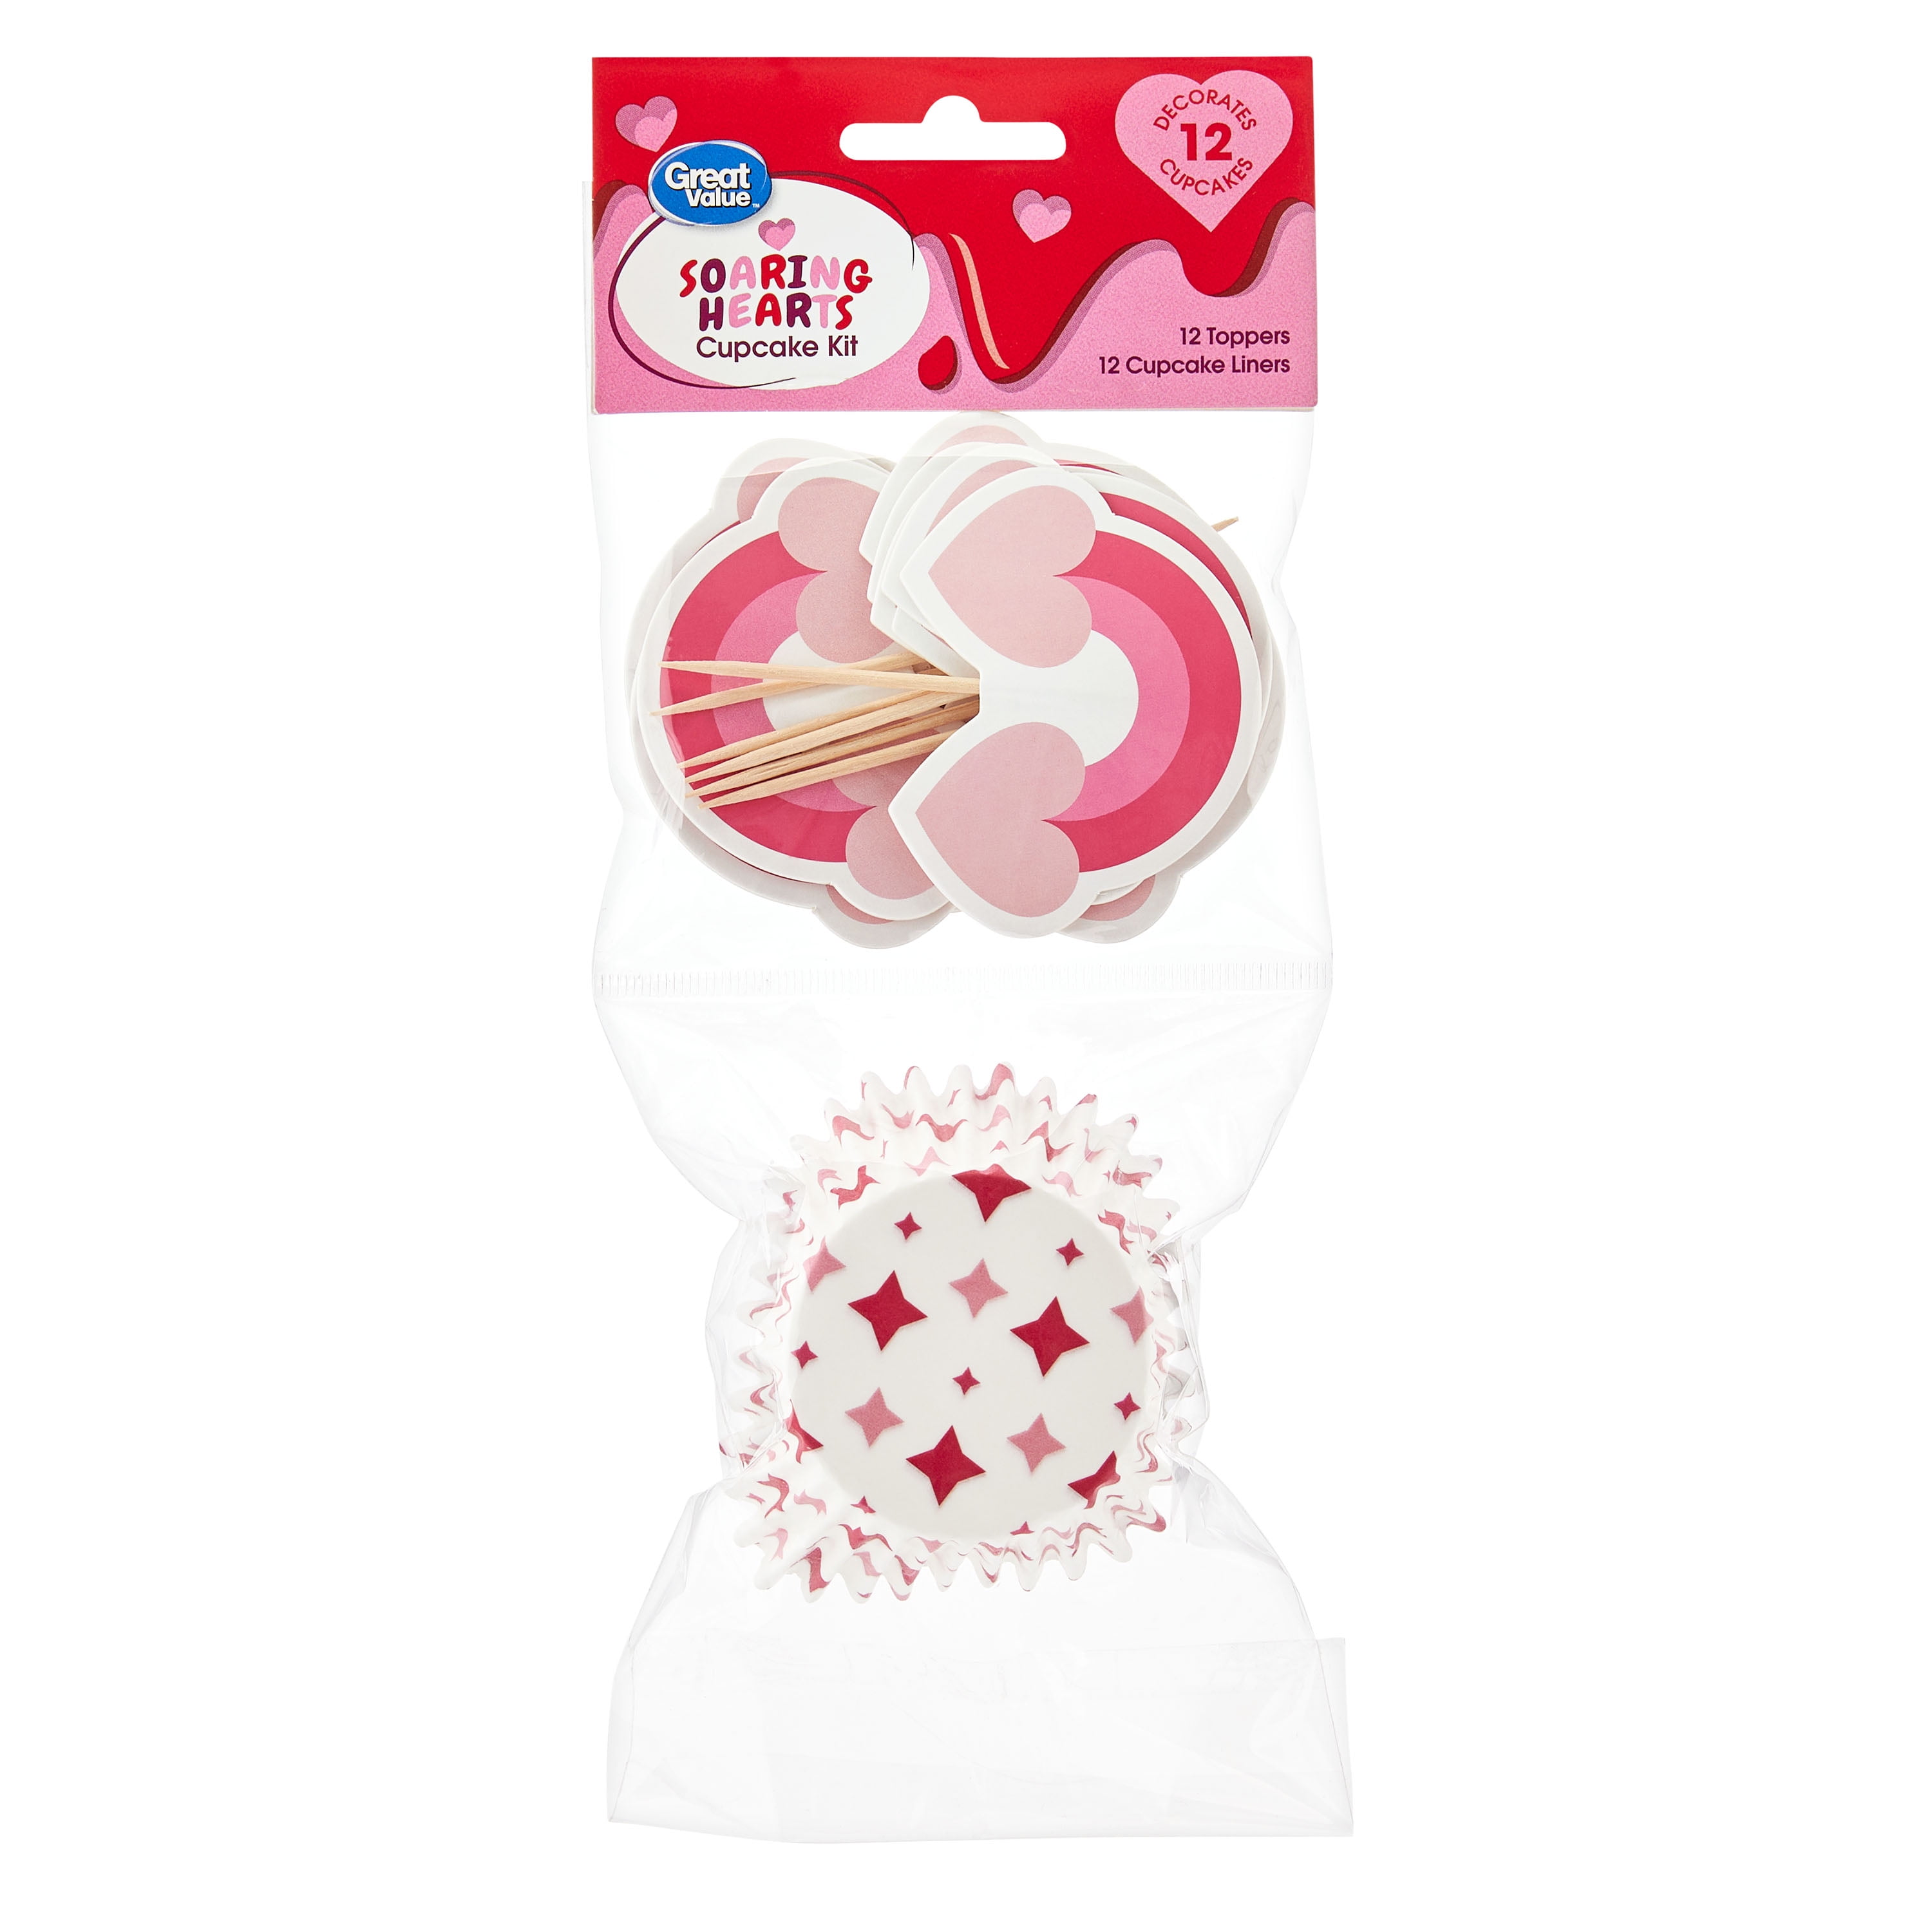 Great Value Soaring Hearts Cupcake Decorating Kit, 12 Count